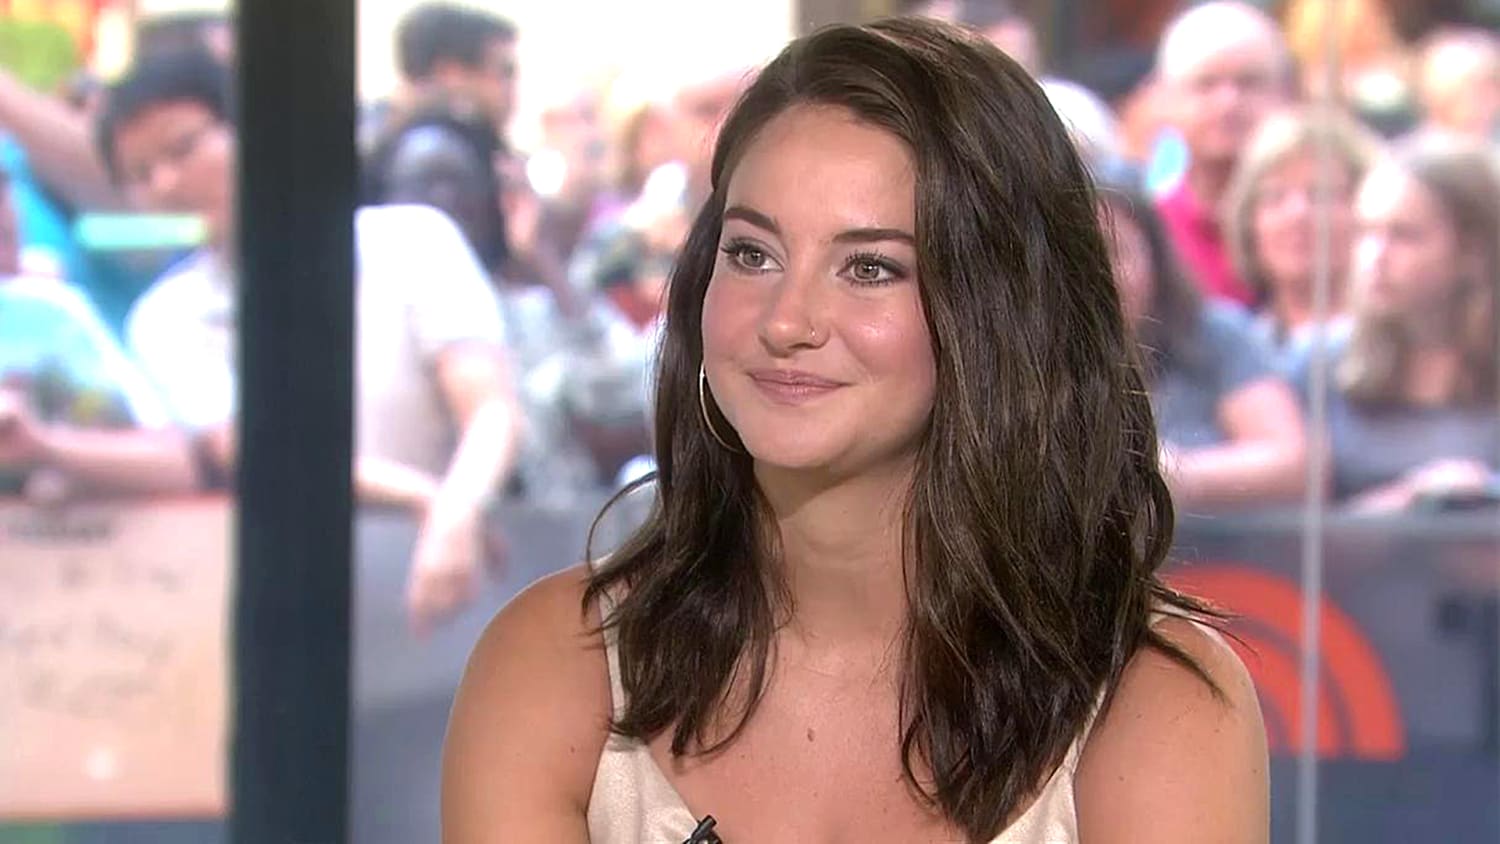 Shailene Woodley's hair is blond — see the new look!